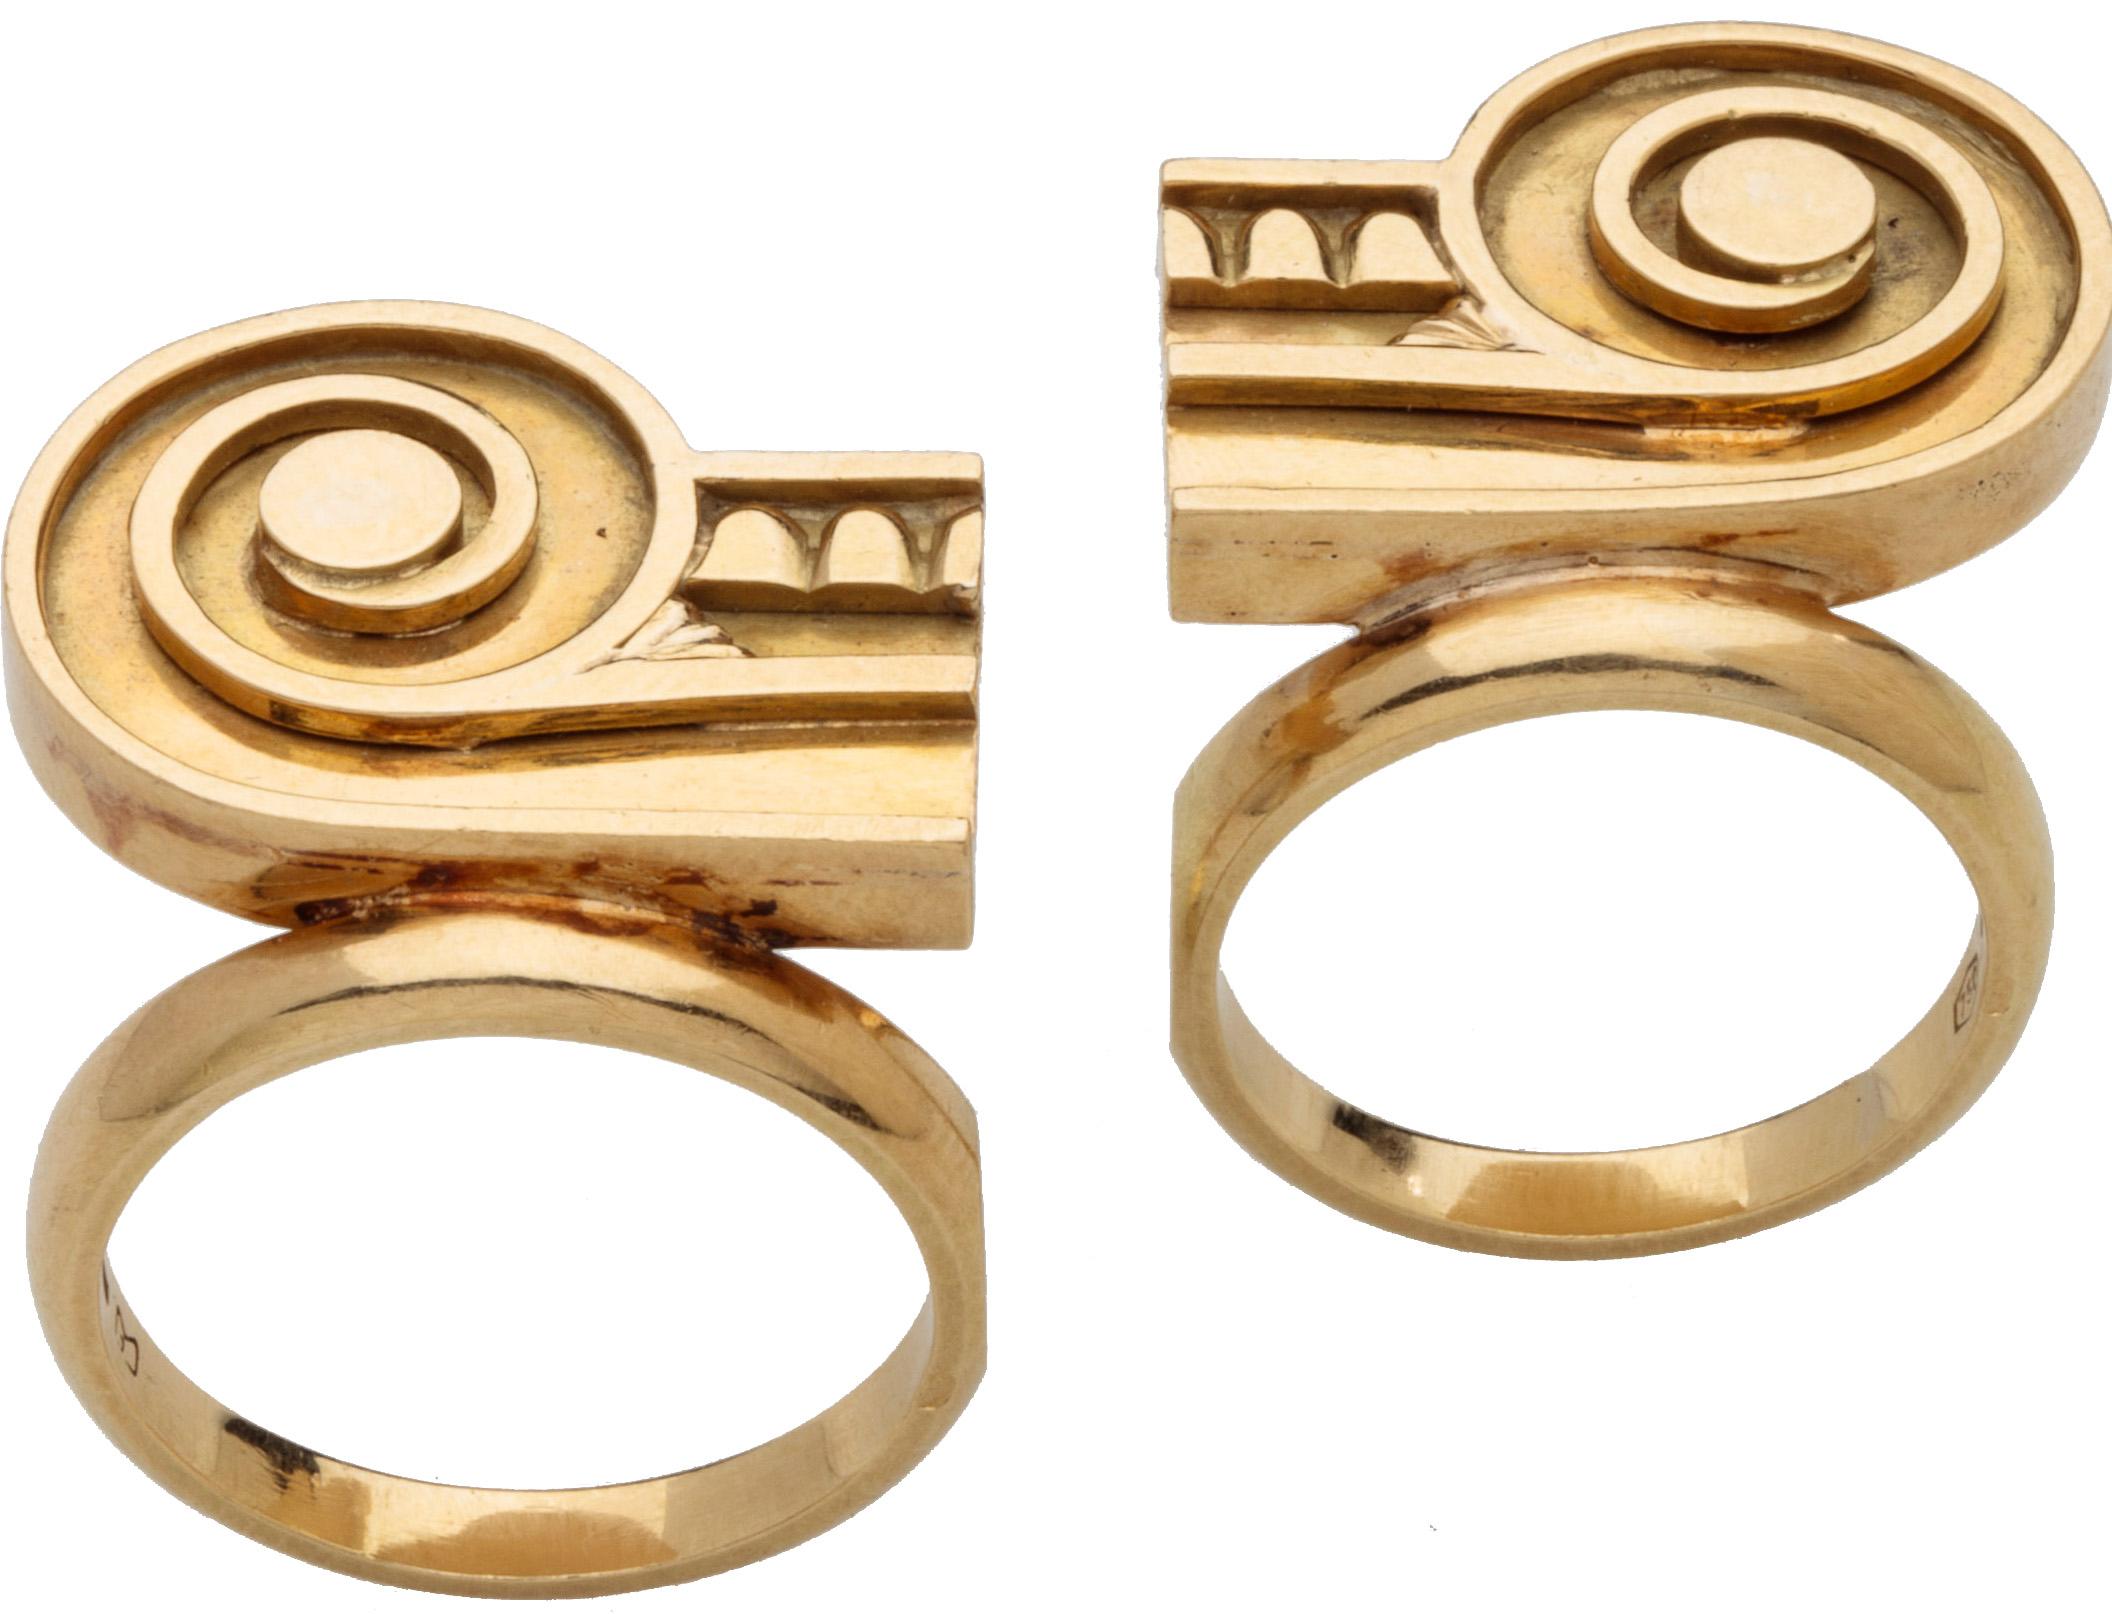 Ionic Capital Rings by Stanley Tigerman
United States and Italy, 1986-1987
Complete width 46 mm., diameter of hoops 21 mm. and 22 mm., bezel when worn together 19 x 46 mm.
Weight 22 gr., US sizes 7 and 8.5, UK sizes O and Q ¾ 

The two gold rings